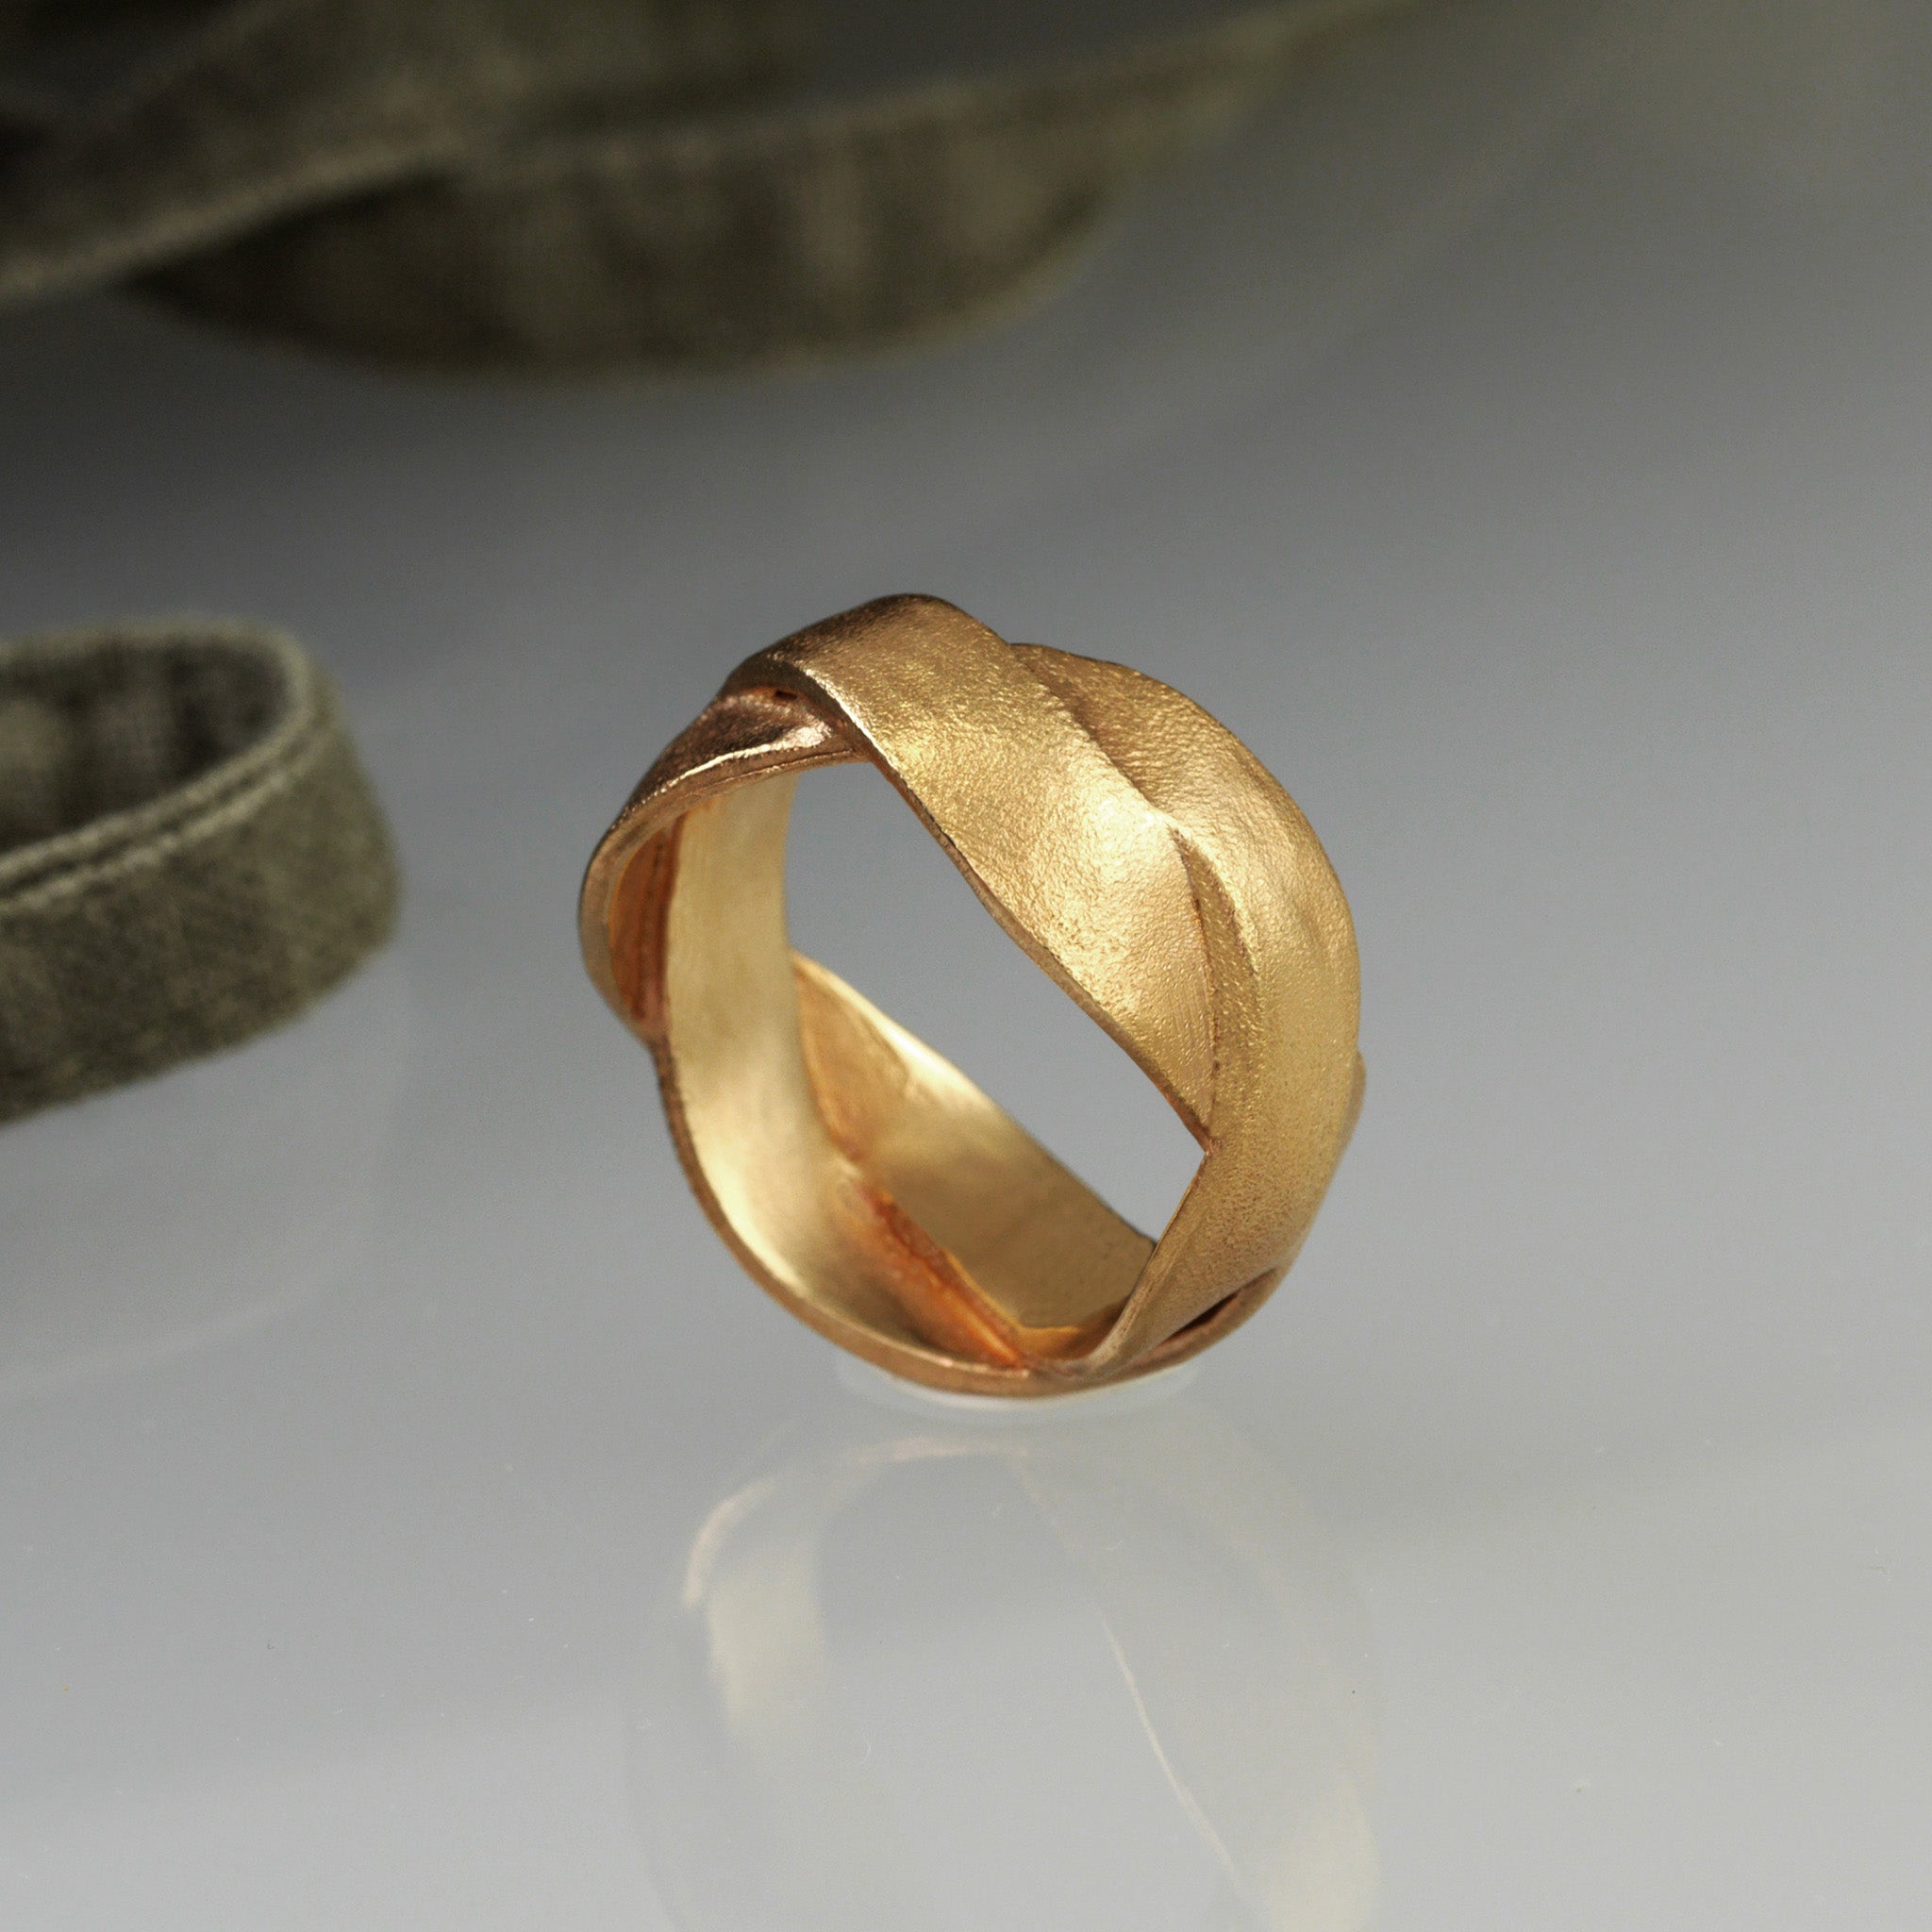 Handmade 18k Rose Gold ring with braided bands, offering an elegant and versatile addition to both everyday wear and special occasions. A timeless classic with a unique twist.